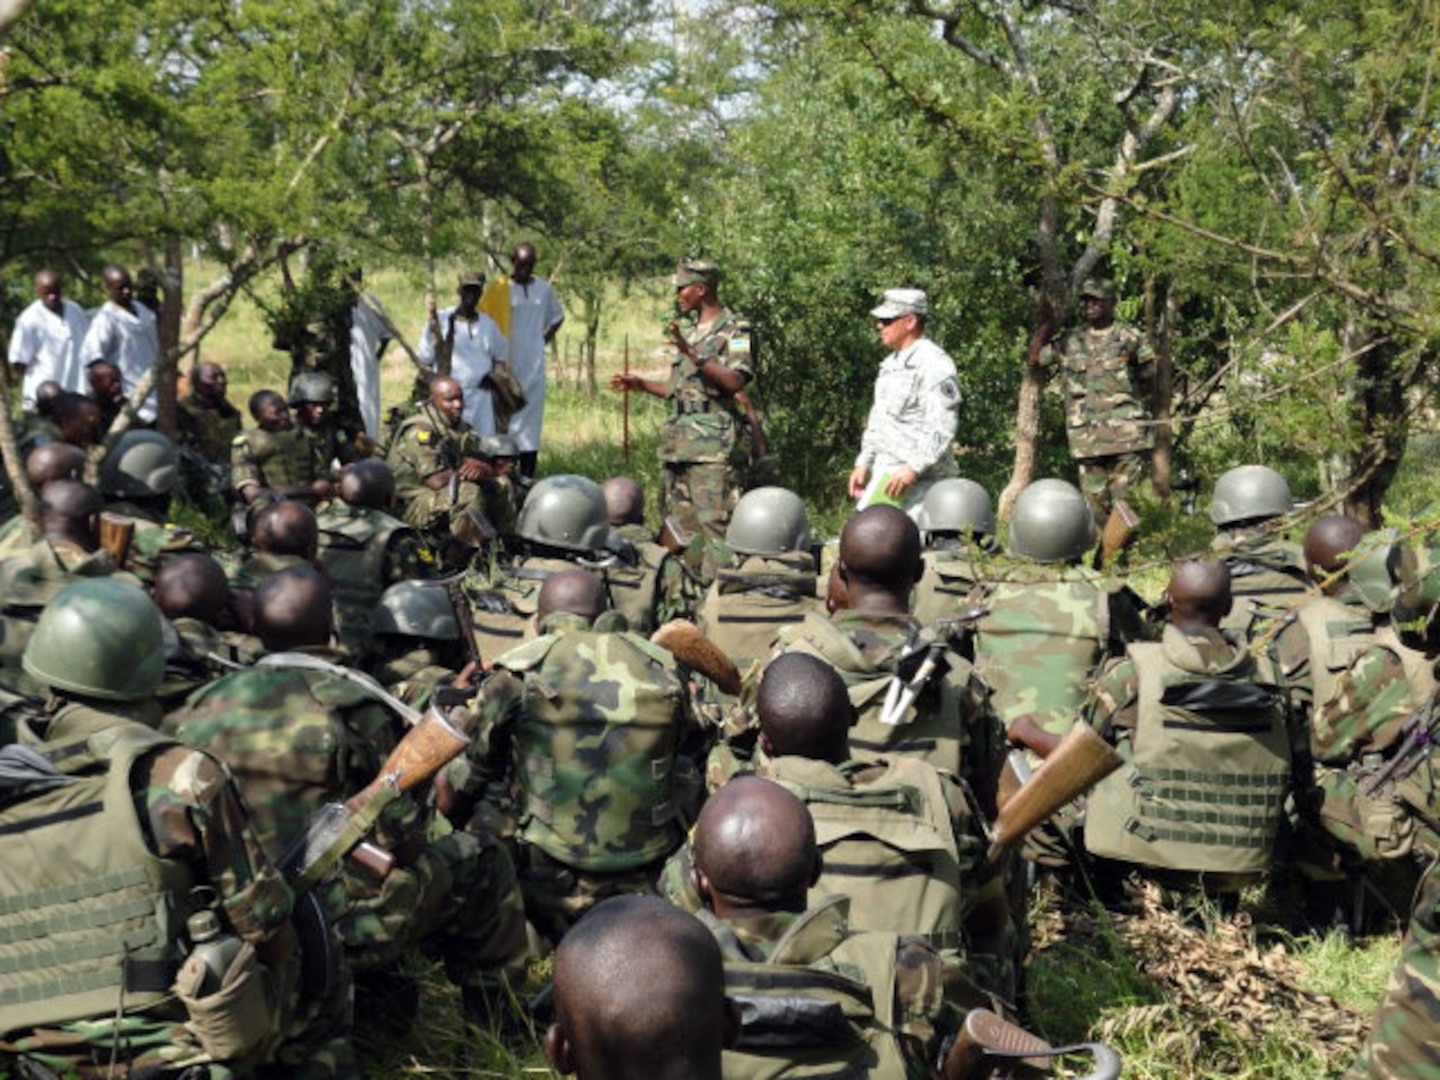 Members of the Rwandan Defense Forces participate in a lesson on urban operations from Rwandan and U.S. Army instructors during a field training portion of a month-long Peace Support Operations Soldier Skills Training course held at the Rwandan military base here Feb. 2, 2012. The RDF invited Texas Army National Guard soldiers from the U.S. Army 3rd Squadron, 124th Cavalry Regiment, in support of Combined Joint Task Force - Horn of Africa, to participate alongside Rwandan instructors during the course.